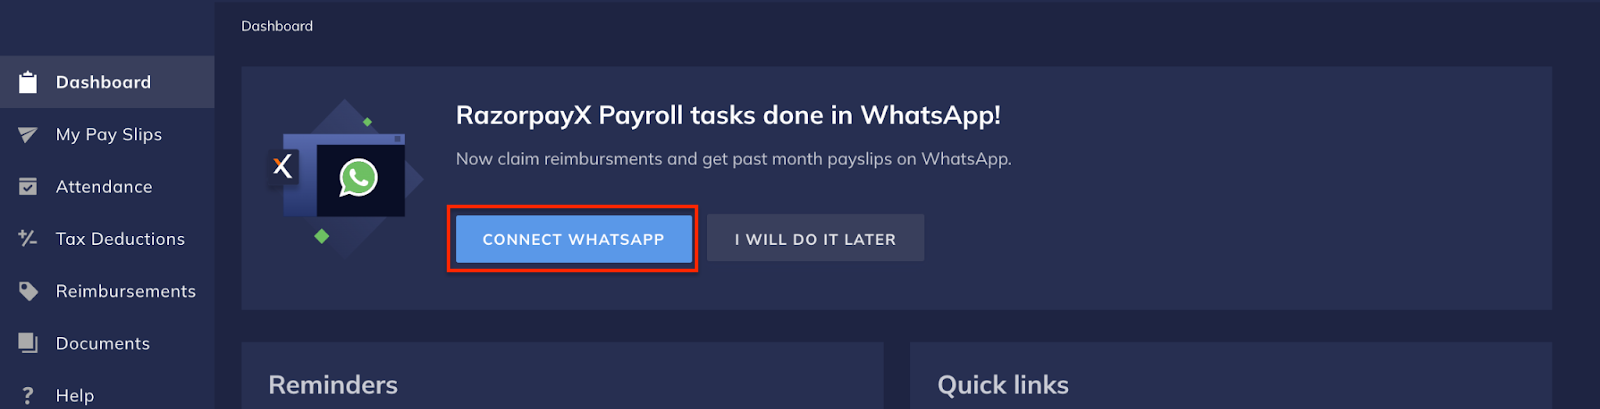 Connect WhatsApp with Payroll